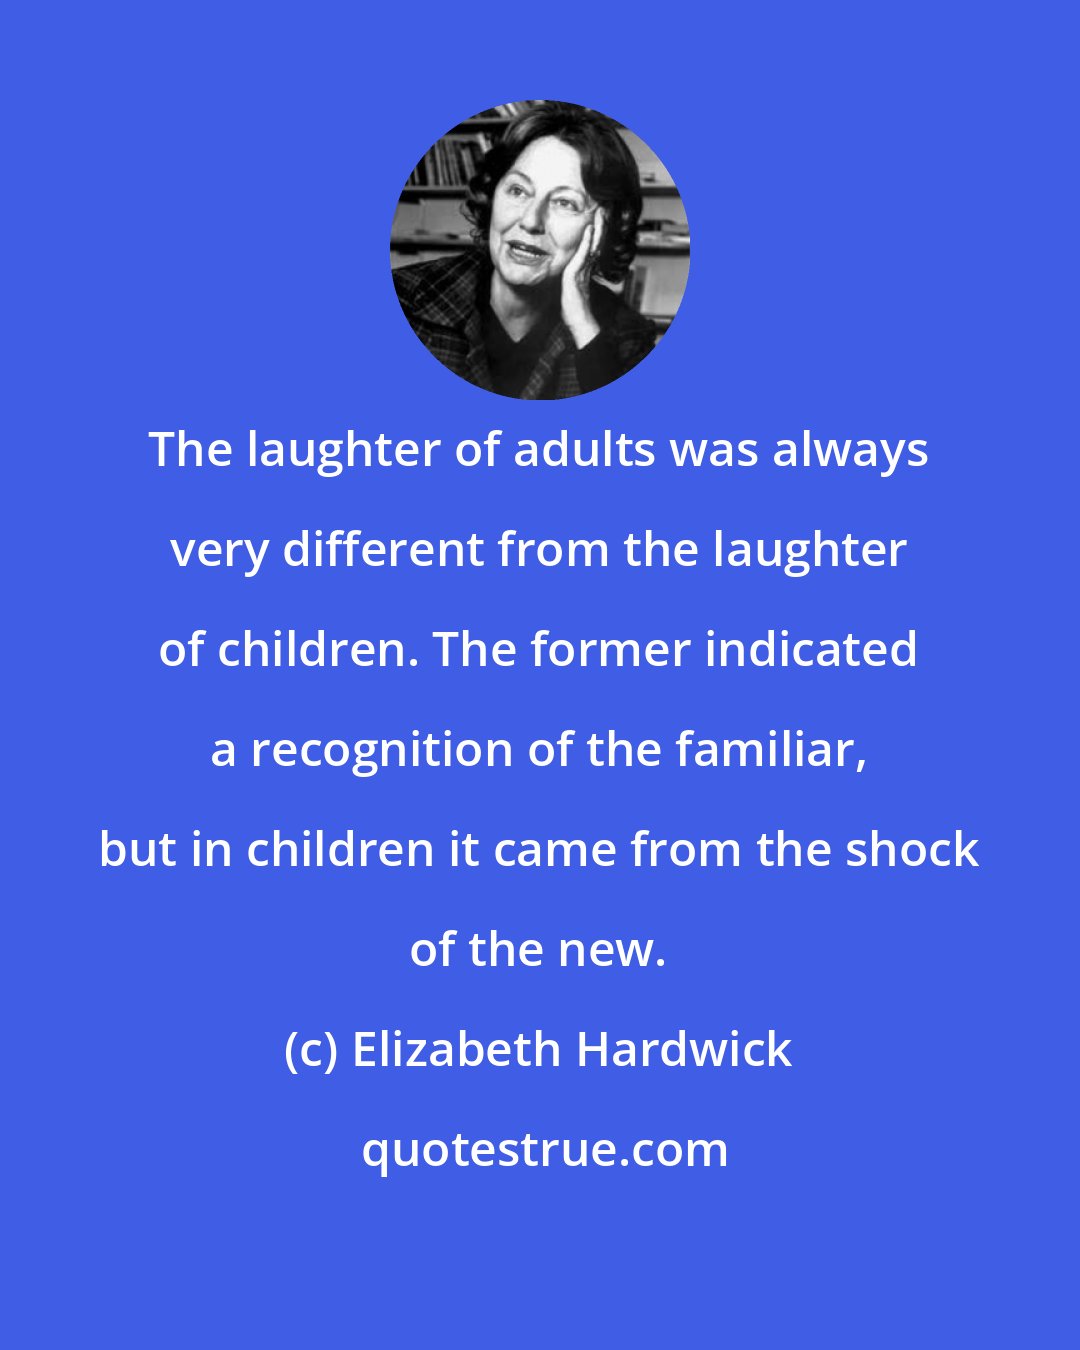 Elizabeth Hardwick: The laughter of adults was always very different from the laughter of children. The former indicated a recognition of the familiar, but in children it came from the shock of the new.